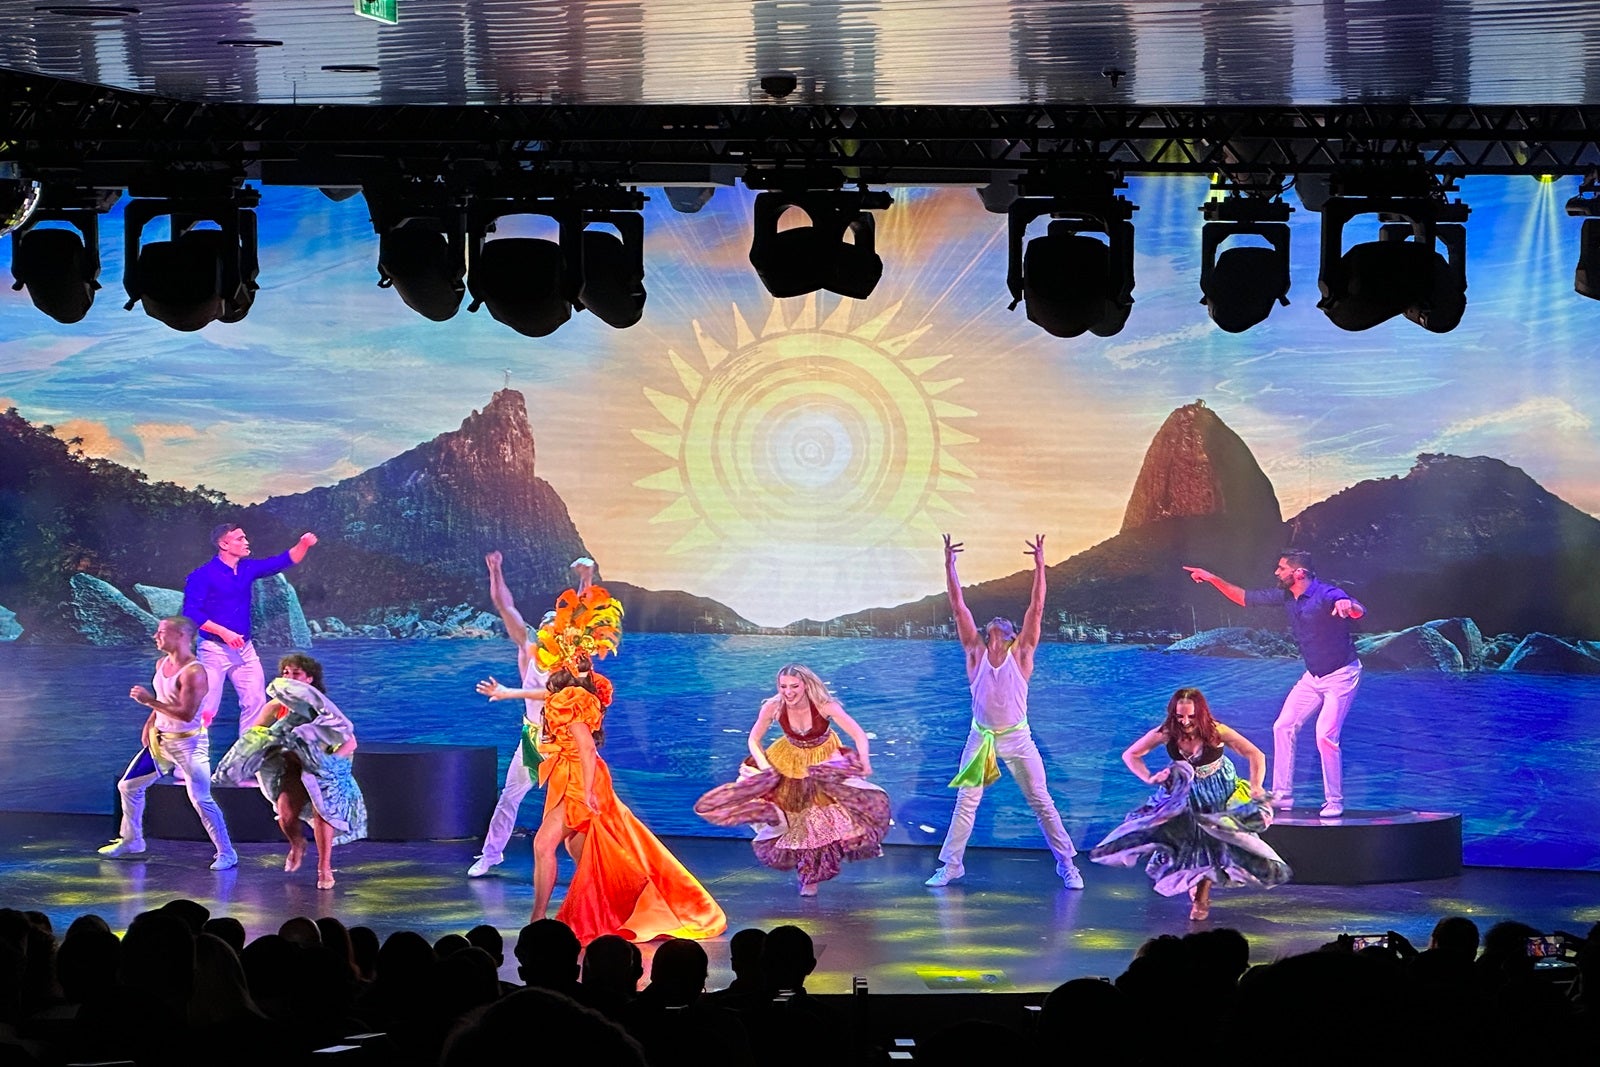 Performers dance to Brazilian music as part of a cruise production show with mountains, water and a sun on an LED screen in the background